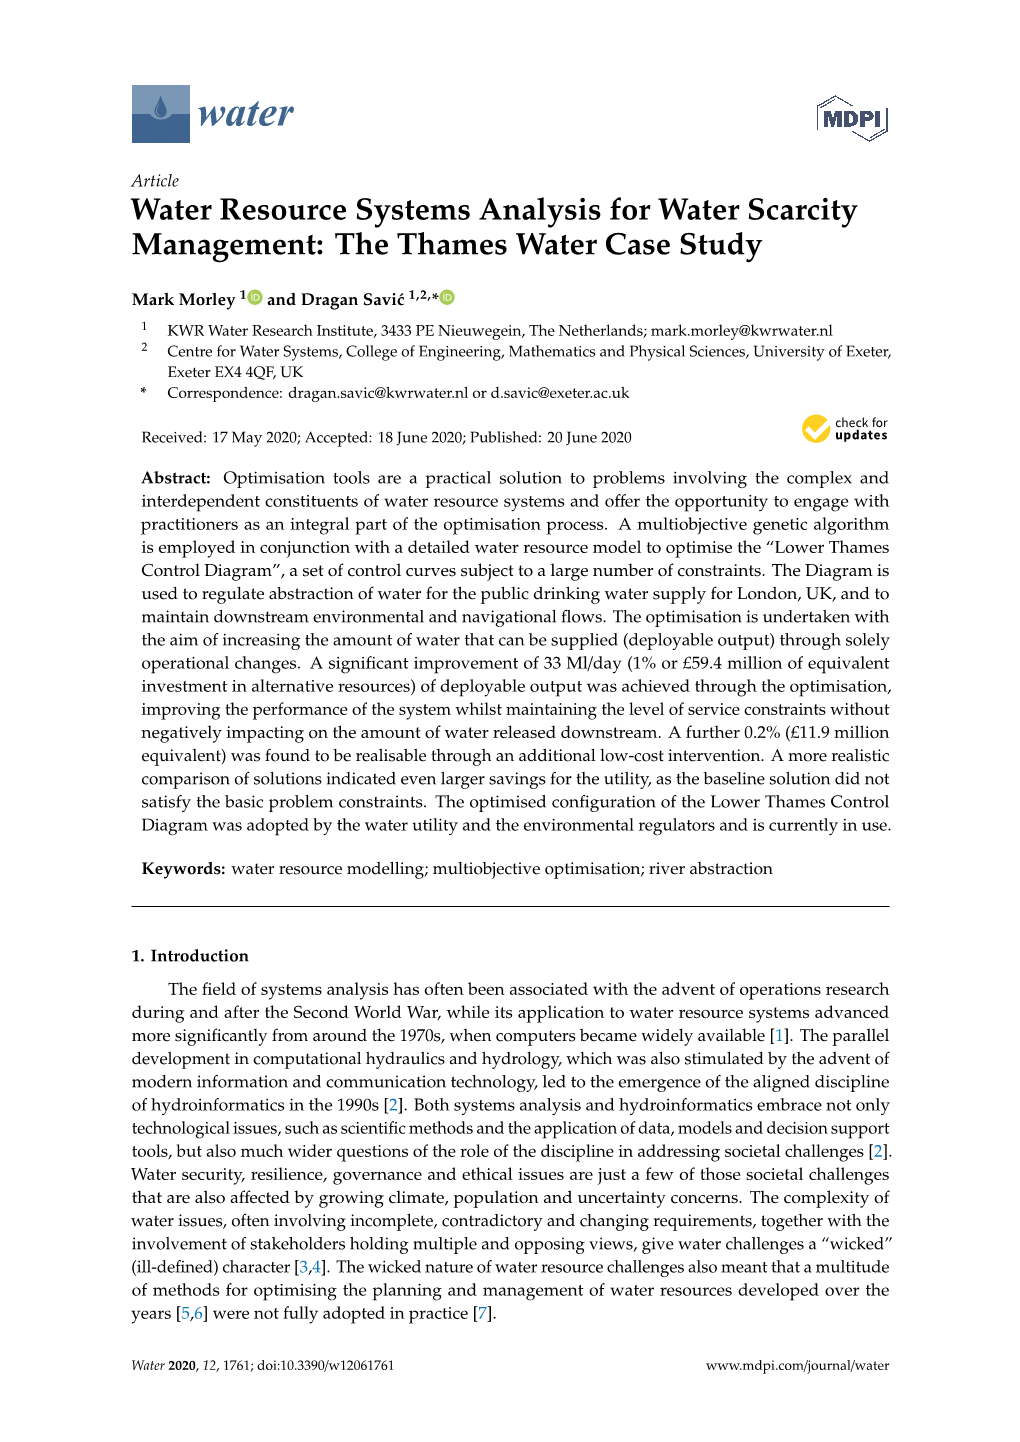 The Thames Water Case Study